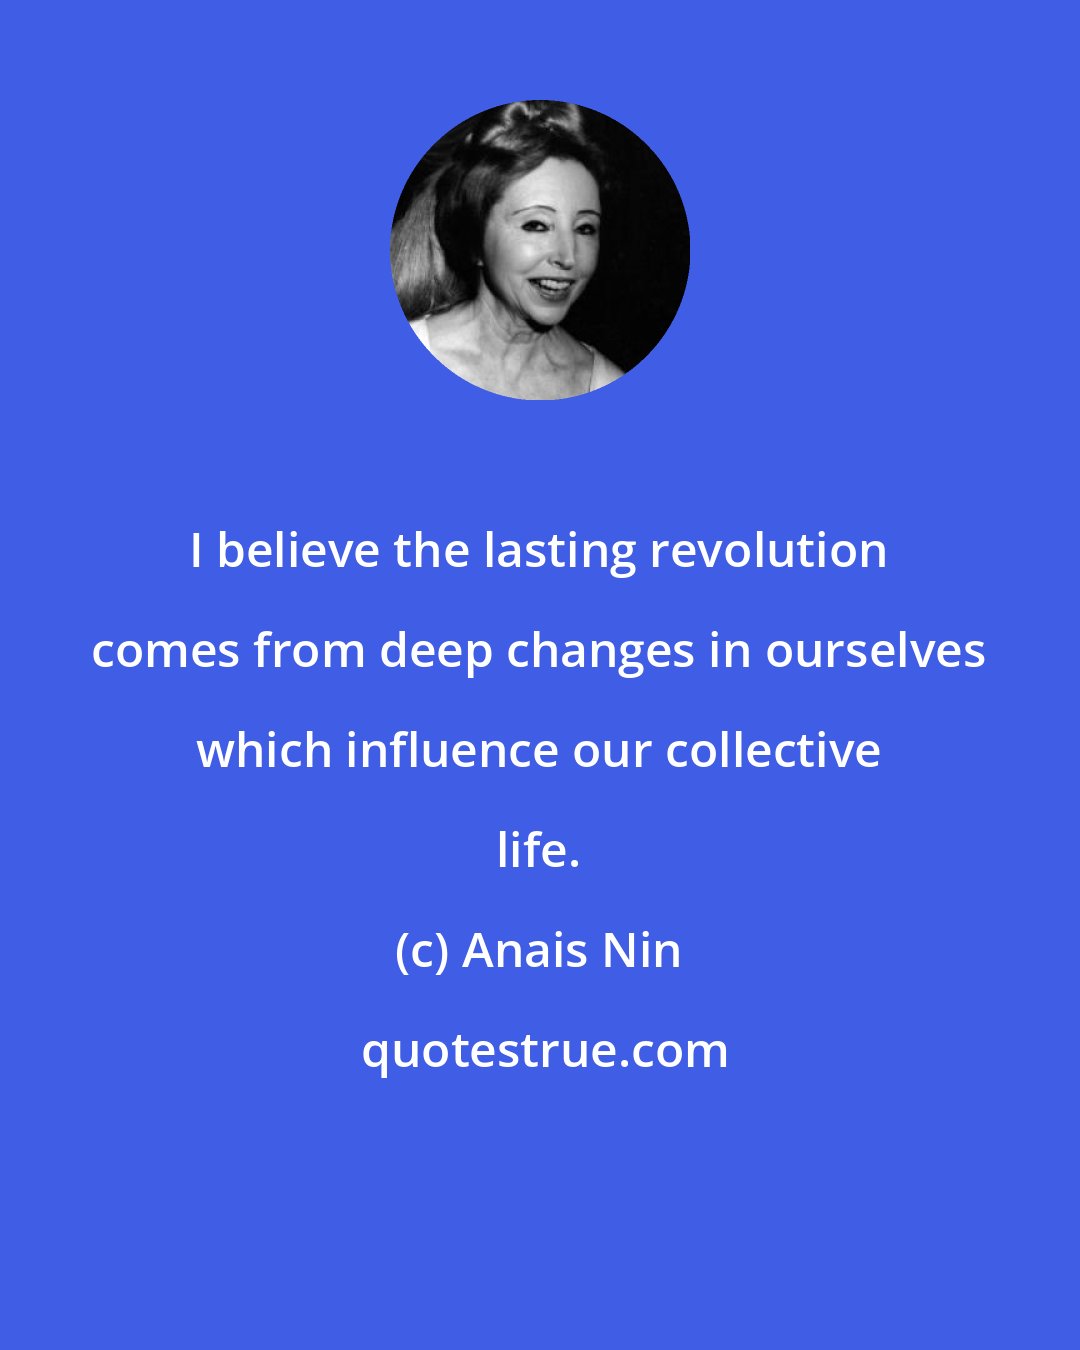 Anais Nin: I believe the lasting revolution comes from deep changes in ourselves which influence our collective life.